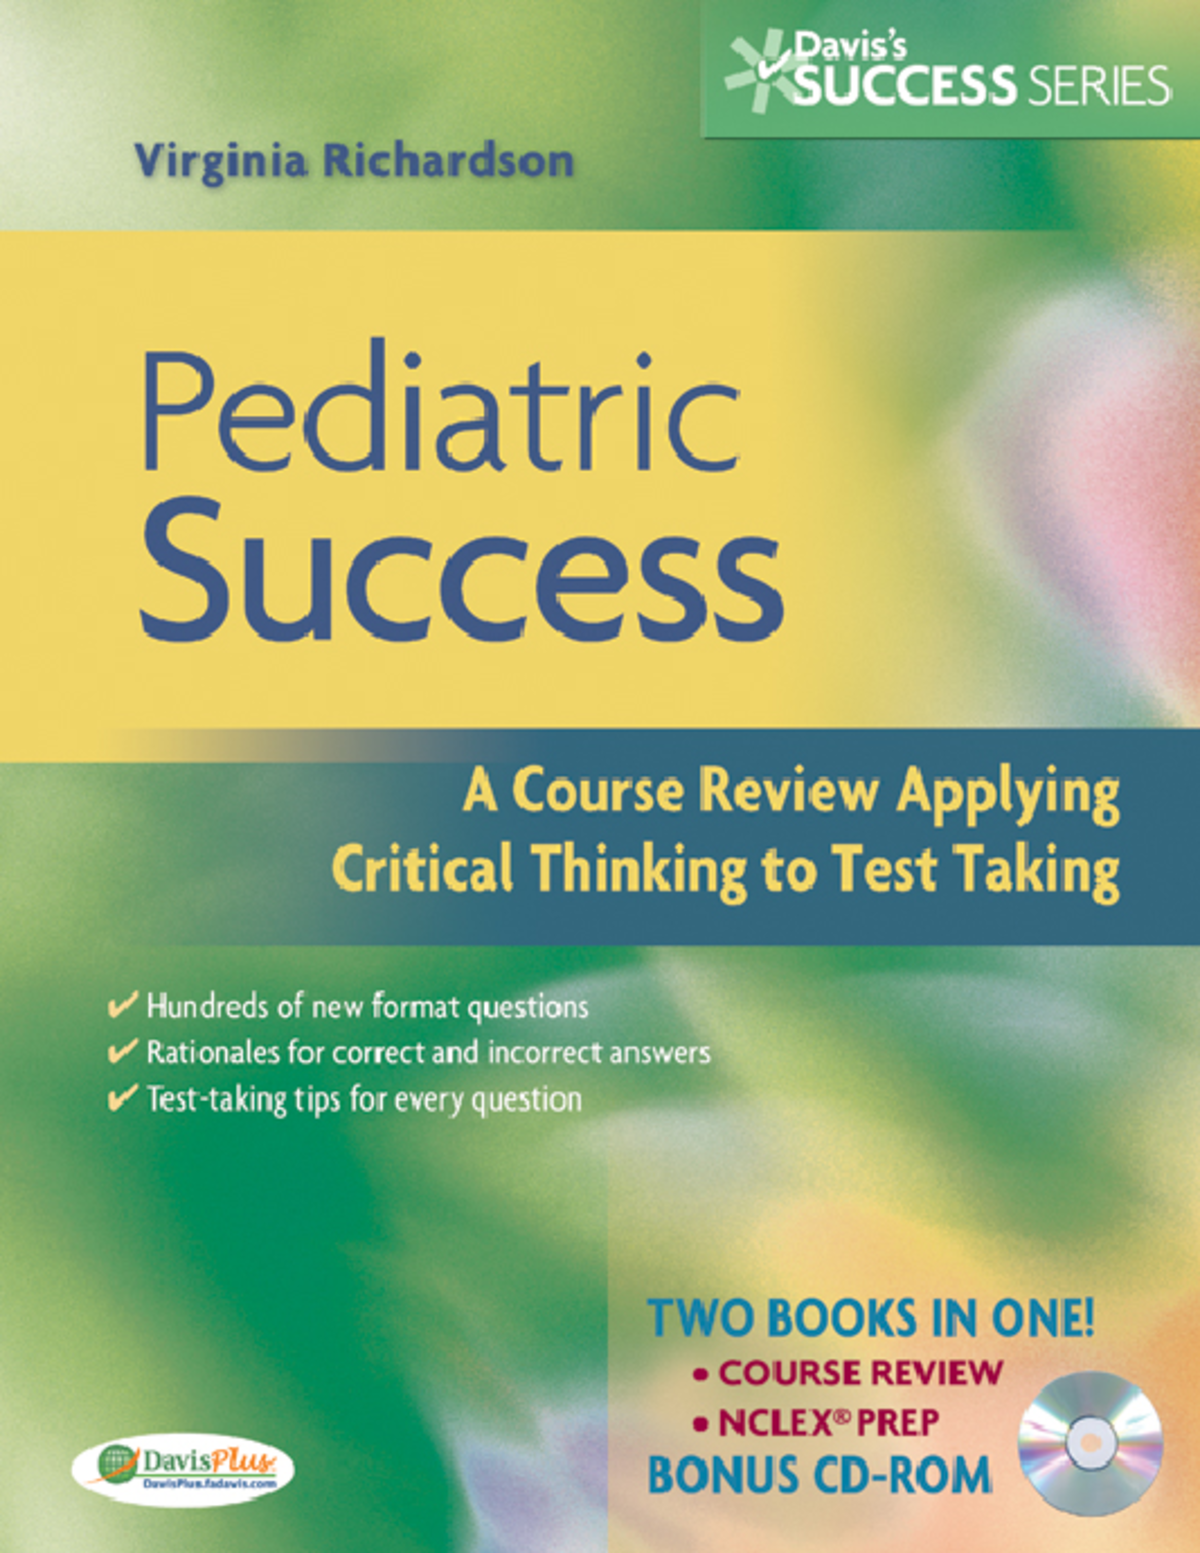 Think 1 test. The applied critical jttinking Handbook (formerly the Red Team Handbook).